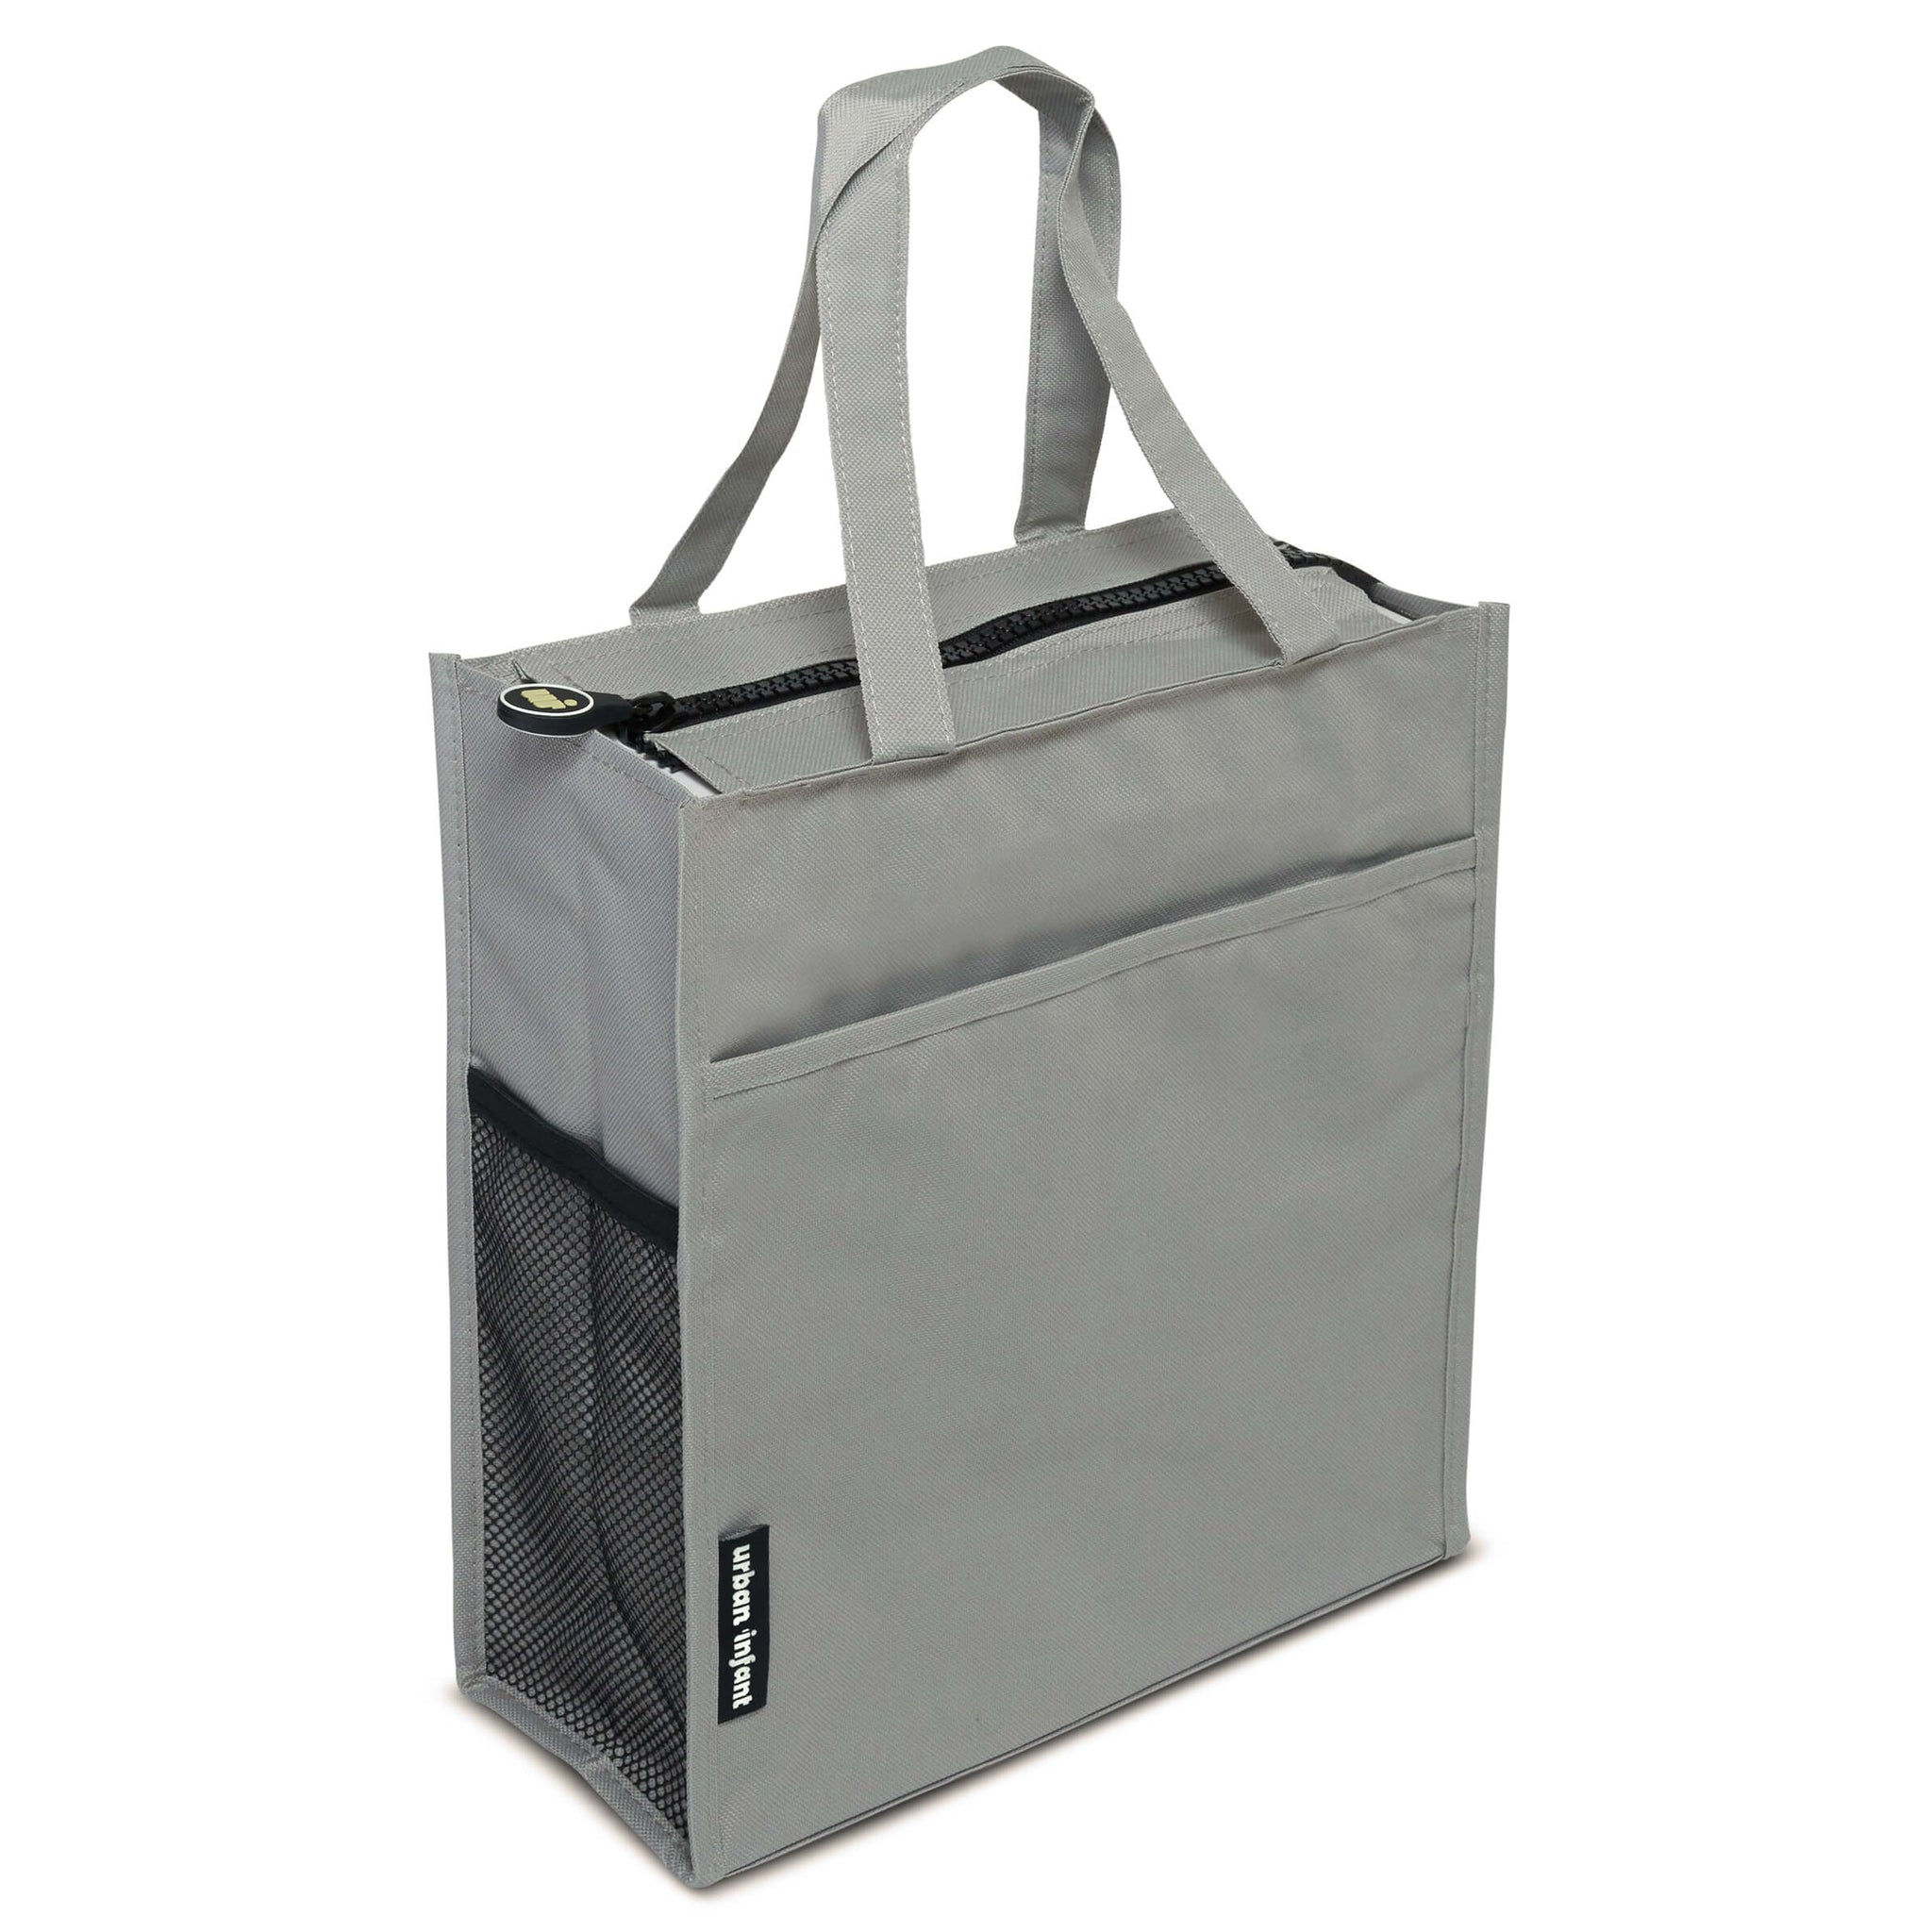 Activity Tote - Case of 6